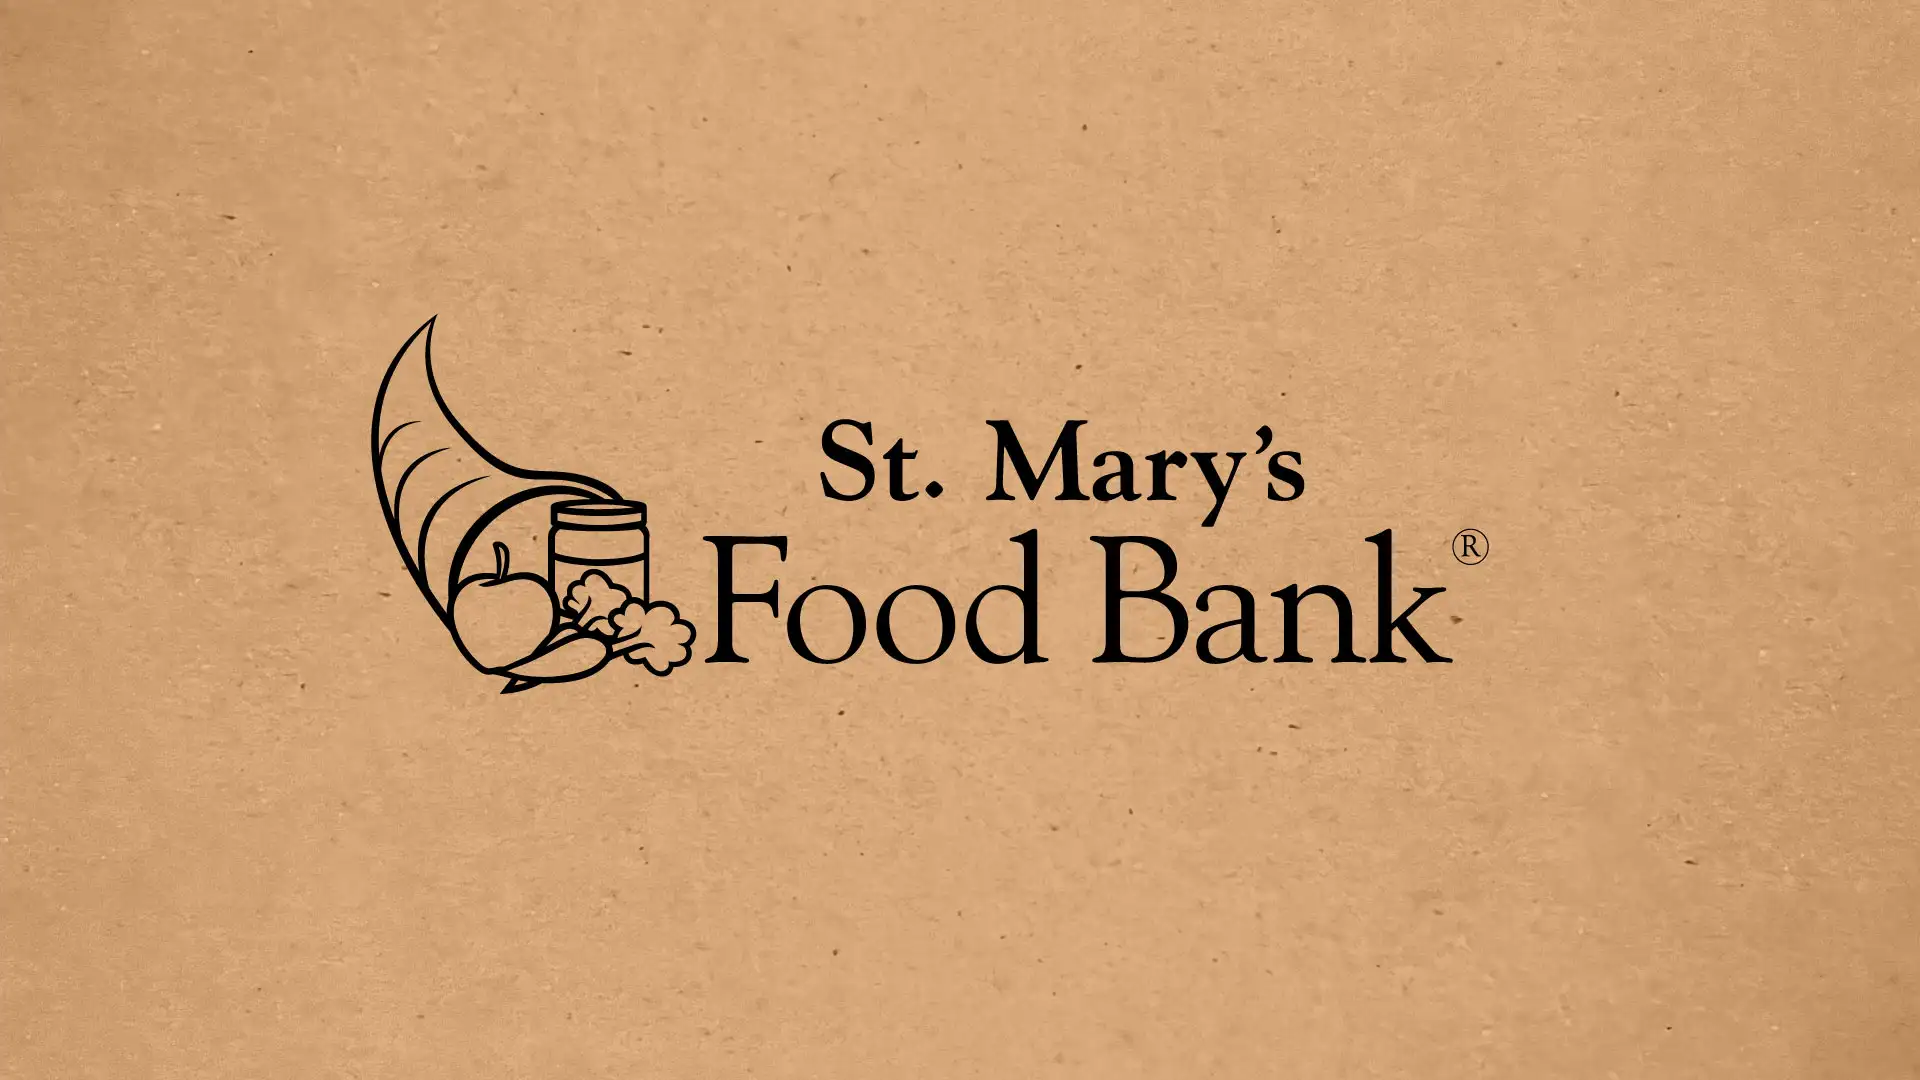 St. Mary's Food Bank logo branding design by Dusty Drake